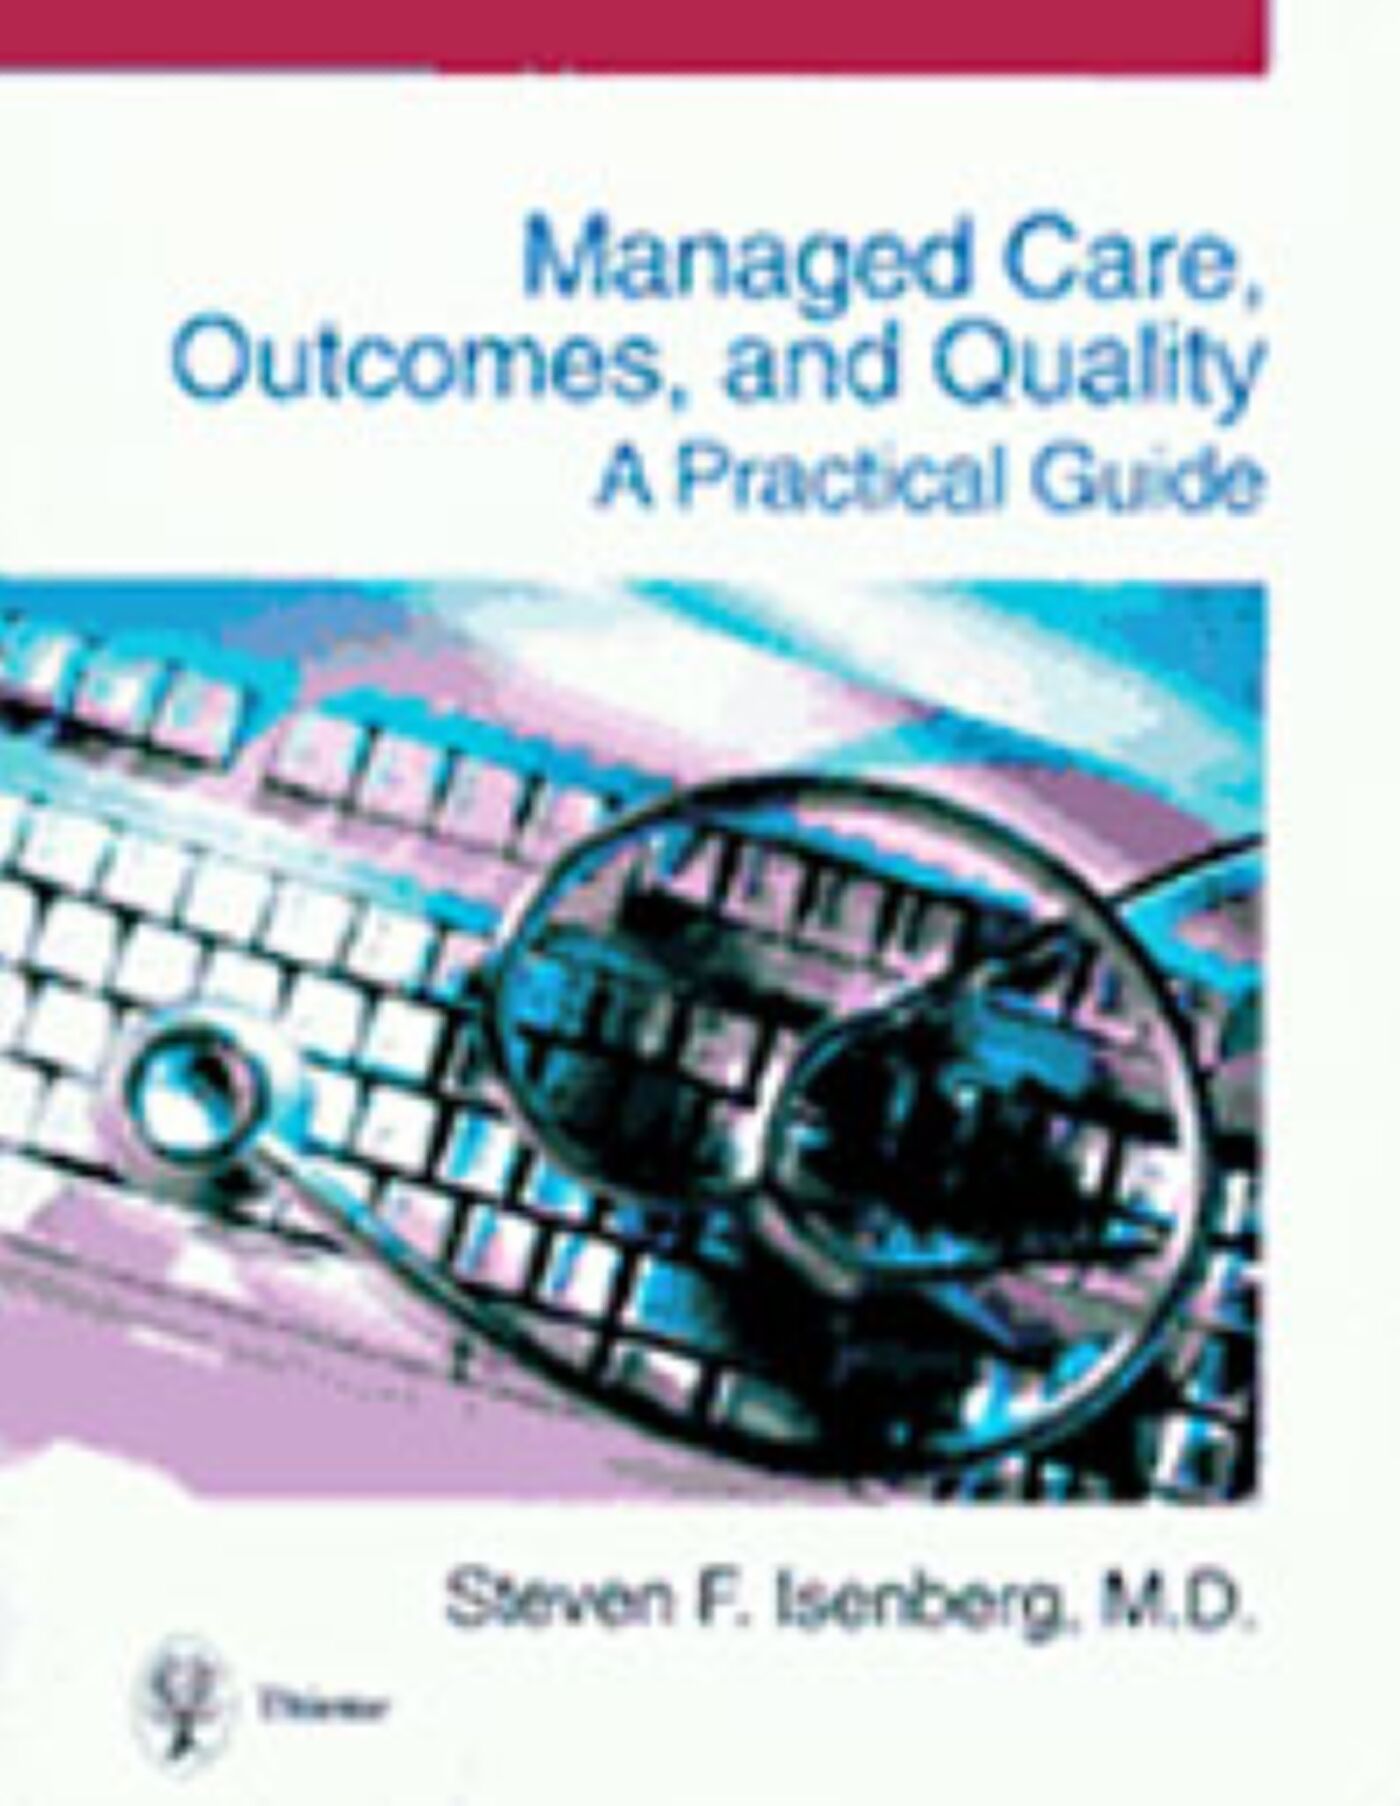 Managed Care, Outcomes, and Quality, 9780865776876